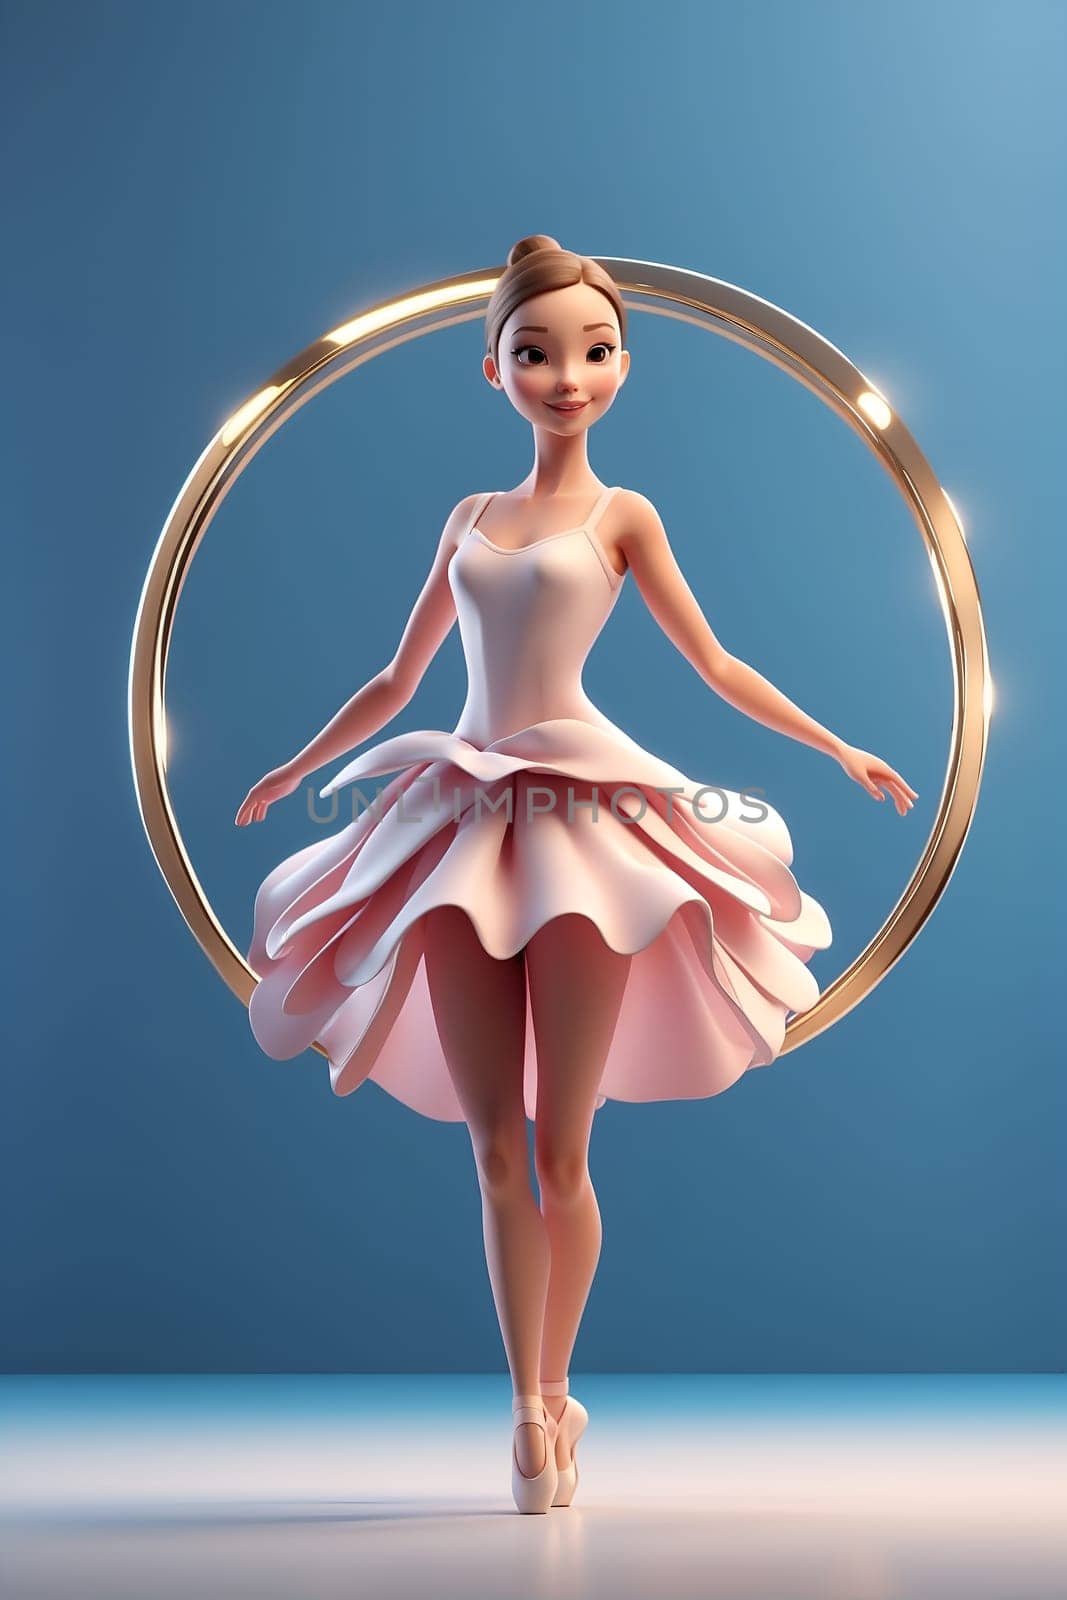 A woman wearing a pink dress stands confidently in front of a perfectly circular object.